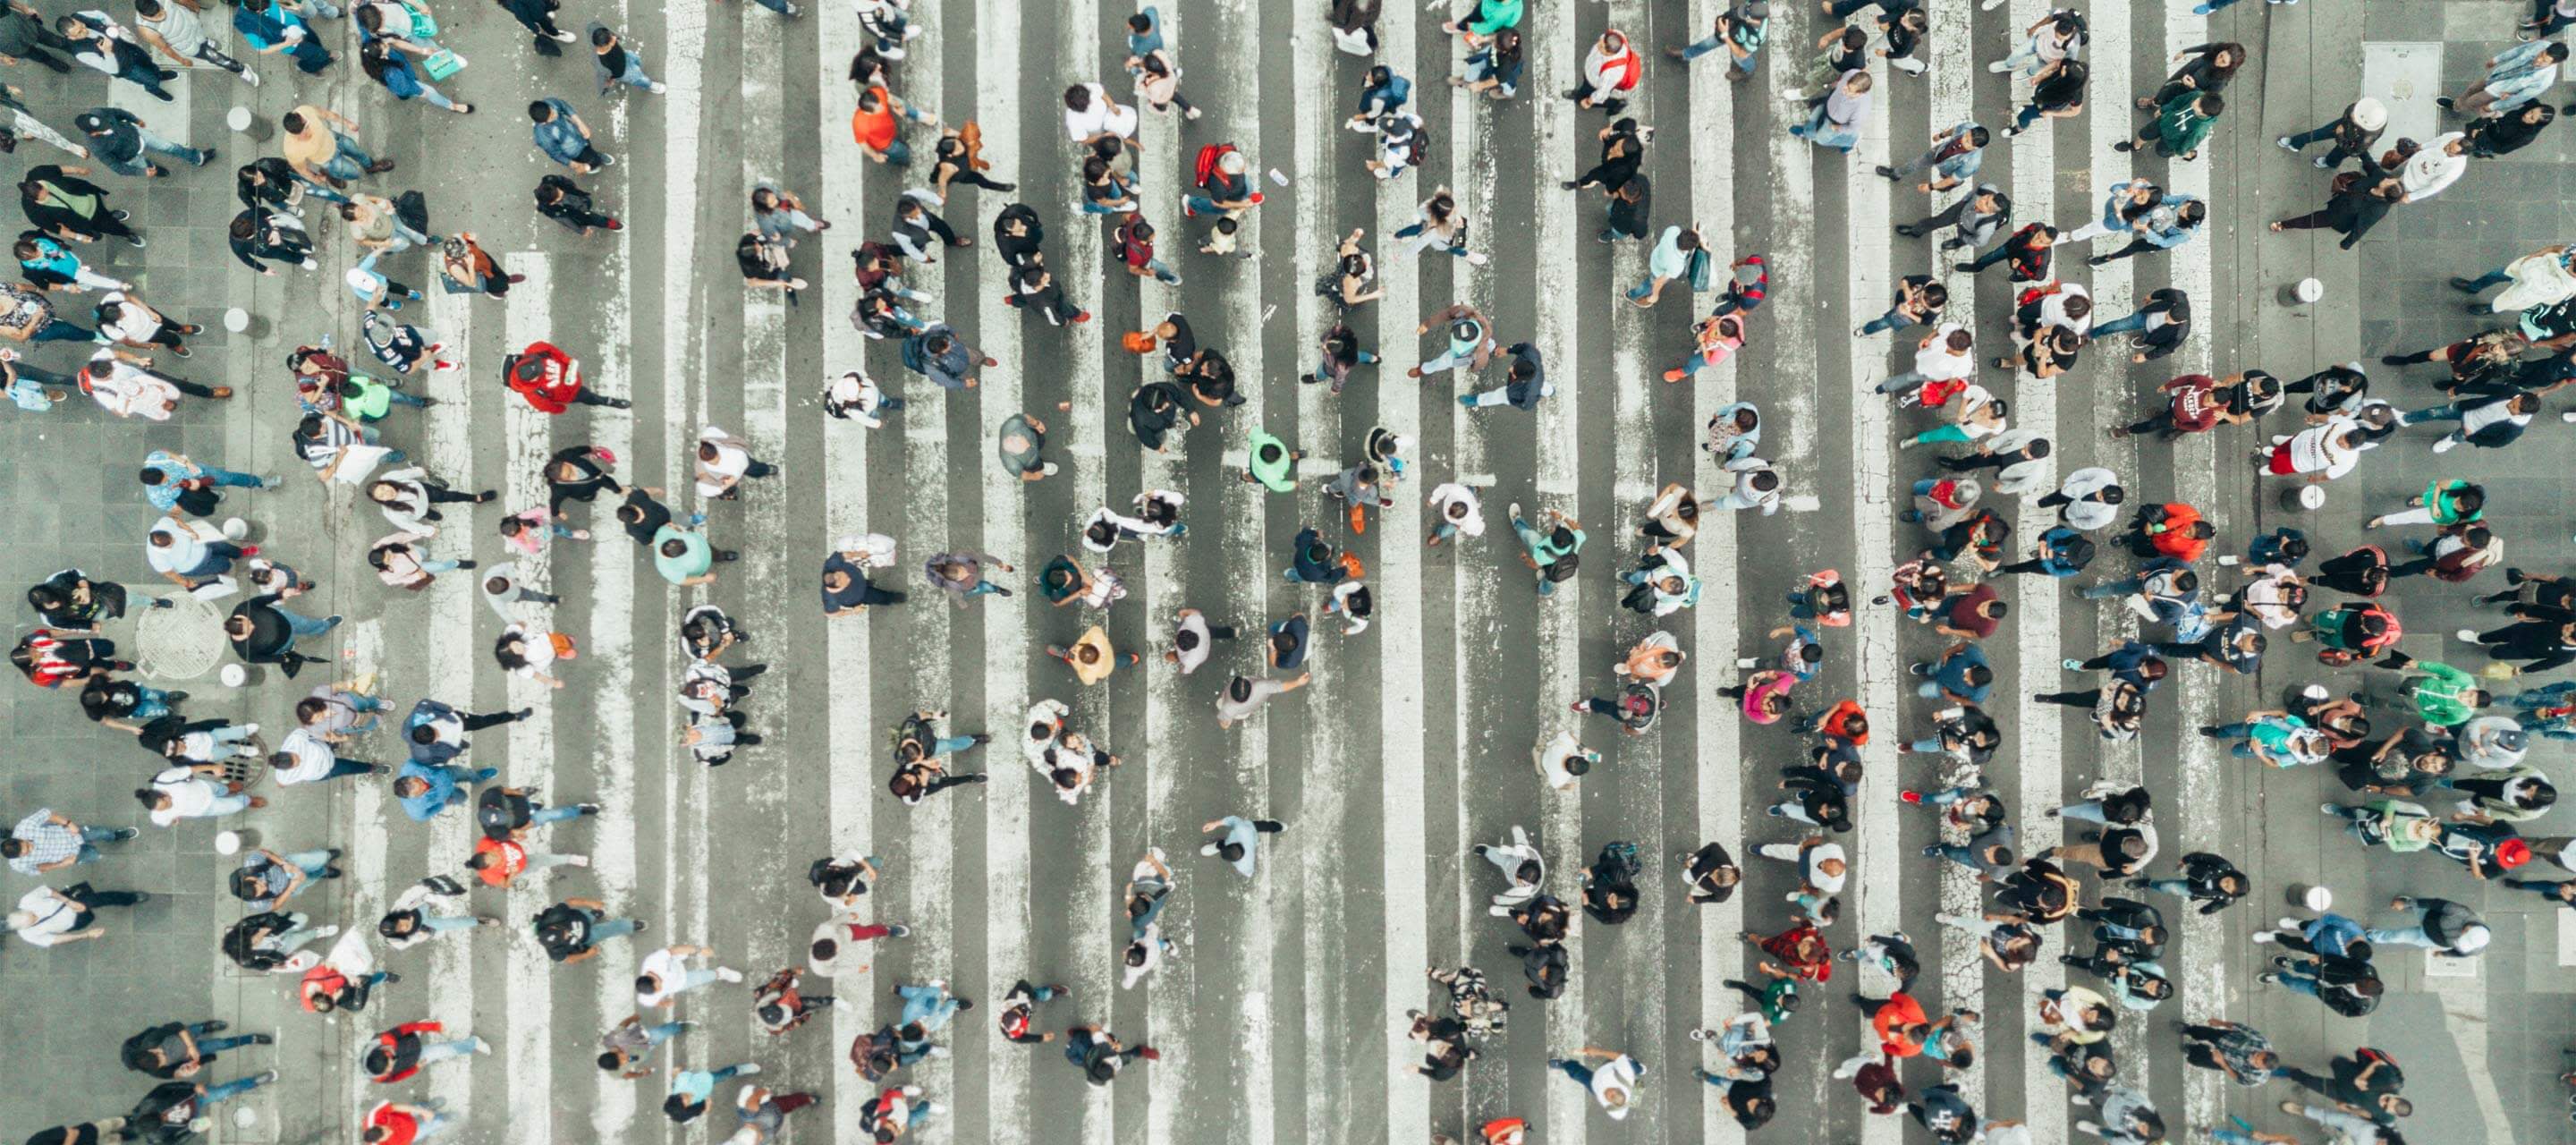 image shows an aerial view of a busy crosswalk